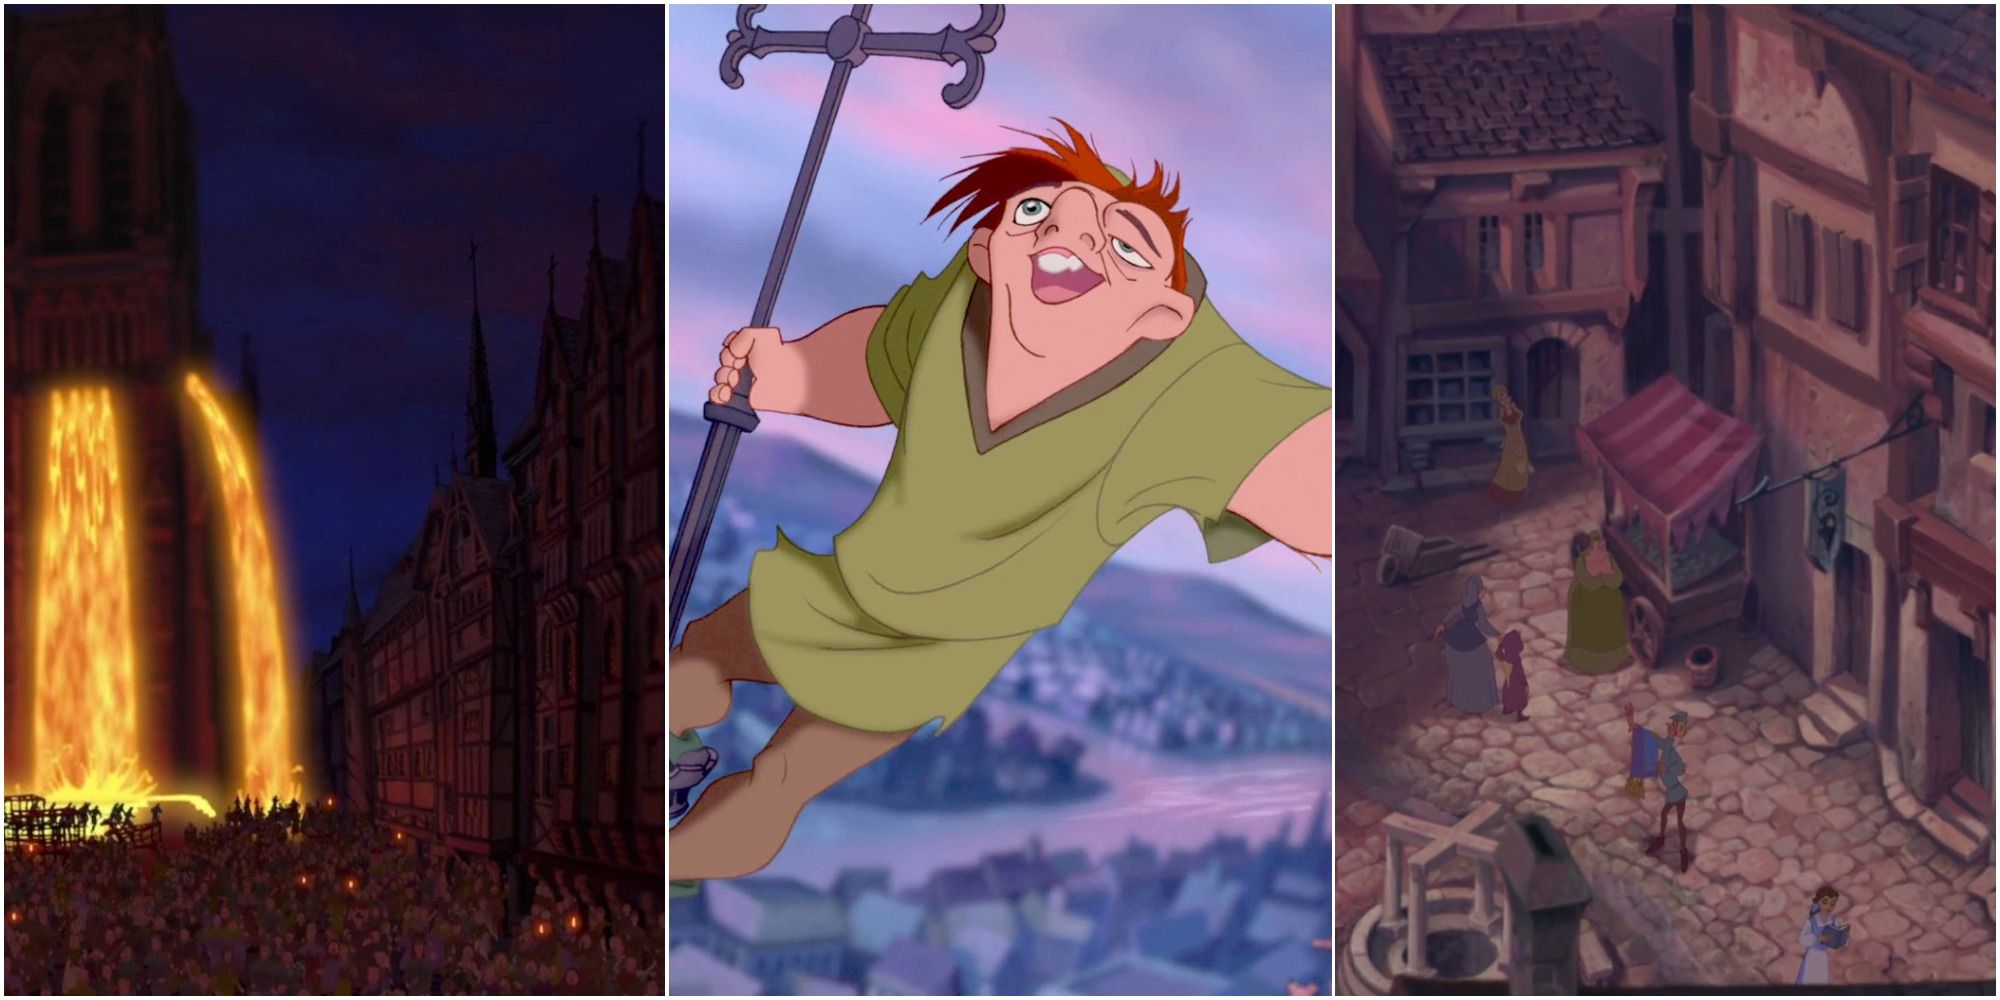 Michelangelo Quagmire Historian 10 Things You Didn't Know About Disney's The Hunchback Of Notre Dame